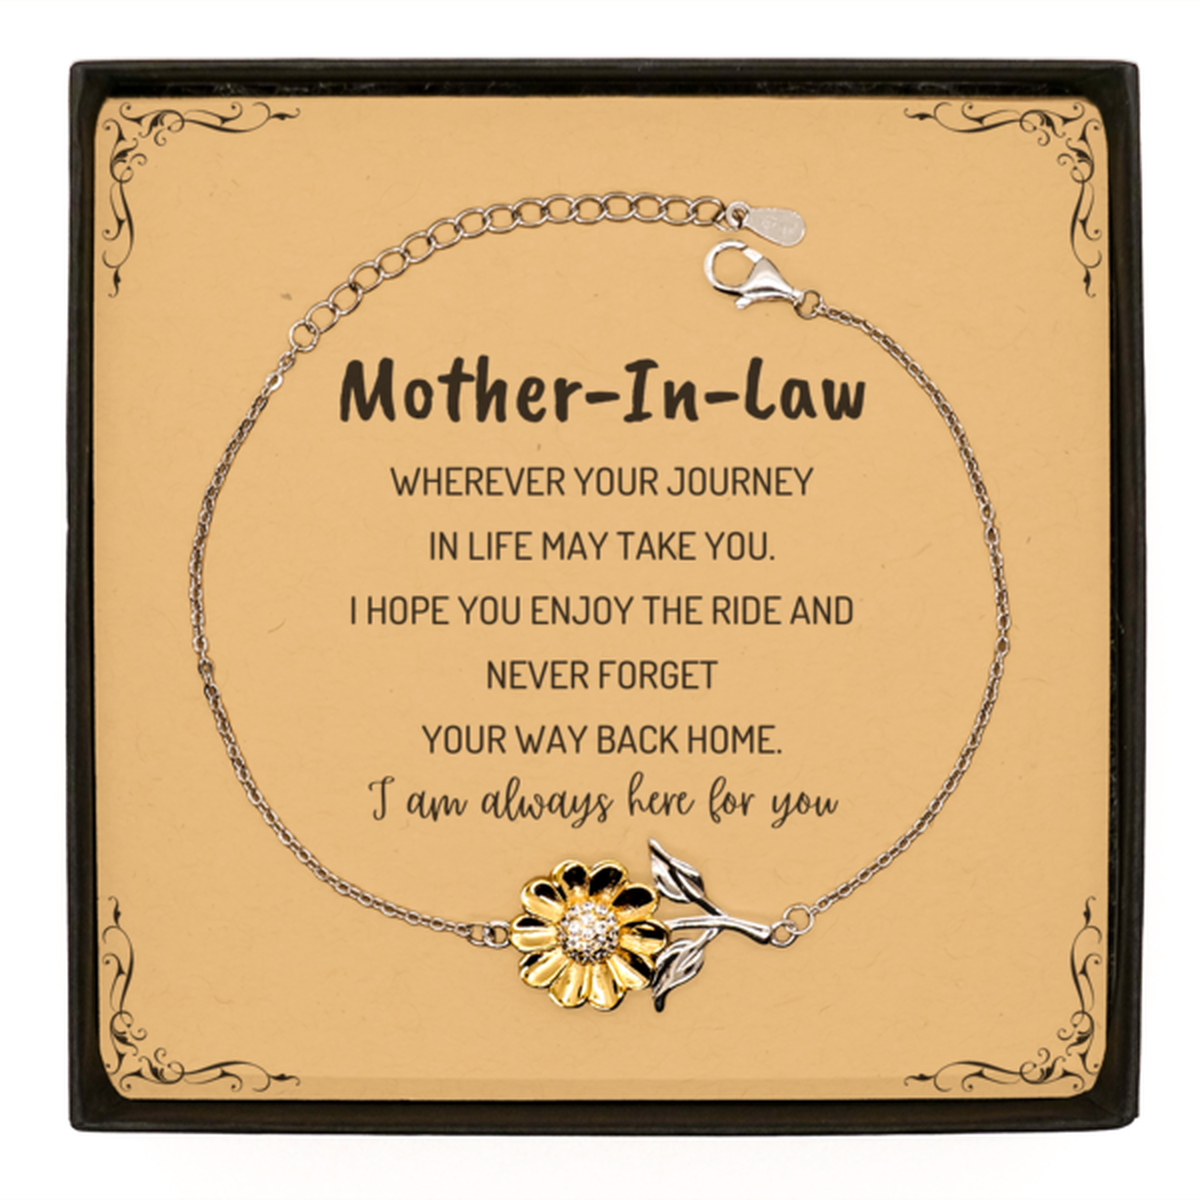 Mother-In-Law wherever your journey in life may take you, I am always here for you Mother-In-Law Sunflower Bracelet, Awesome Christmas Gifts For Mother-In-Law Message Card, Mother-In-Law Birthday Gifts for Men Women Family Loved One